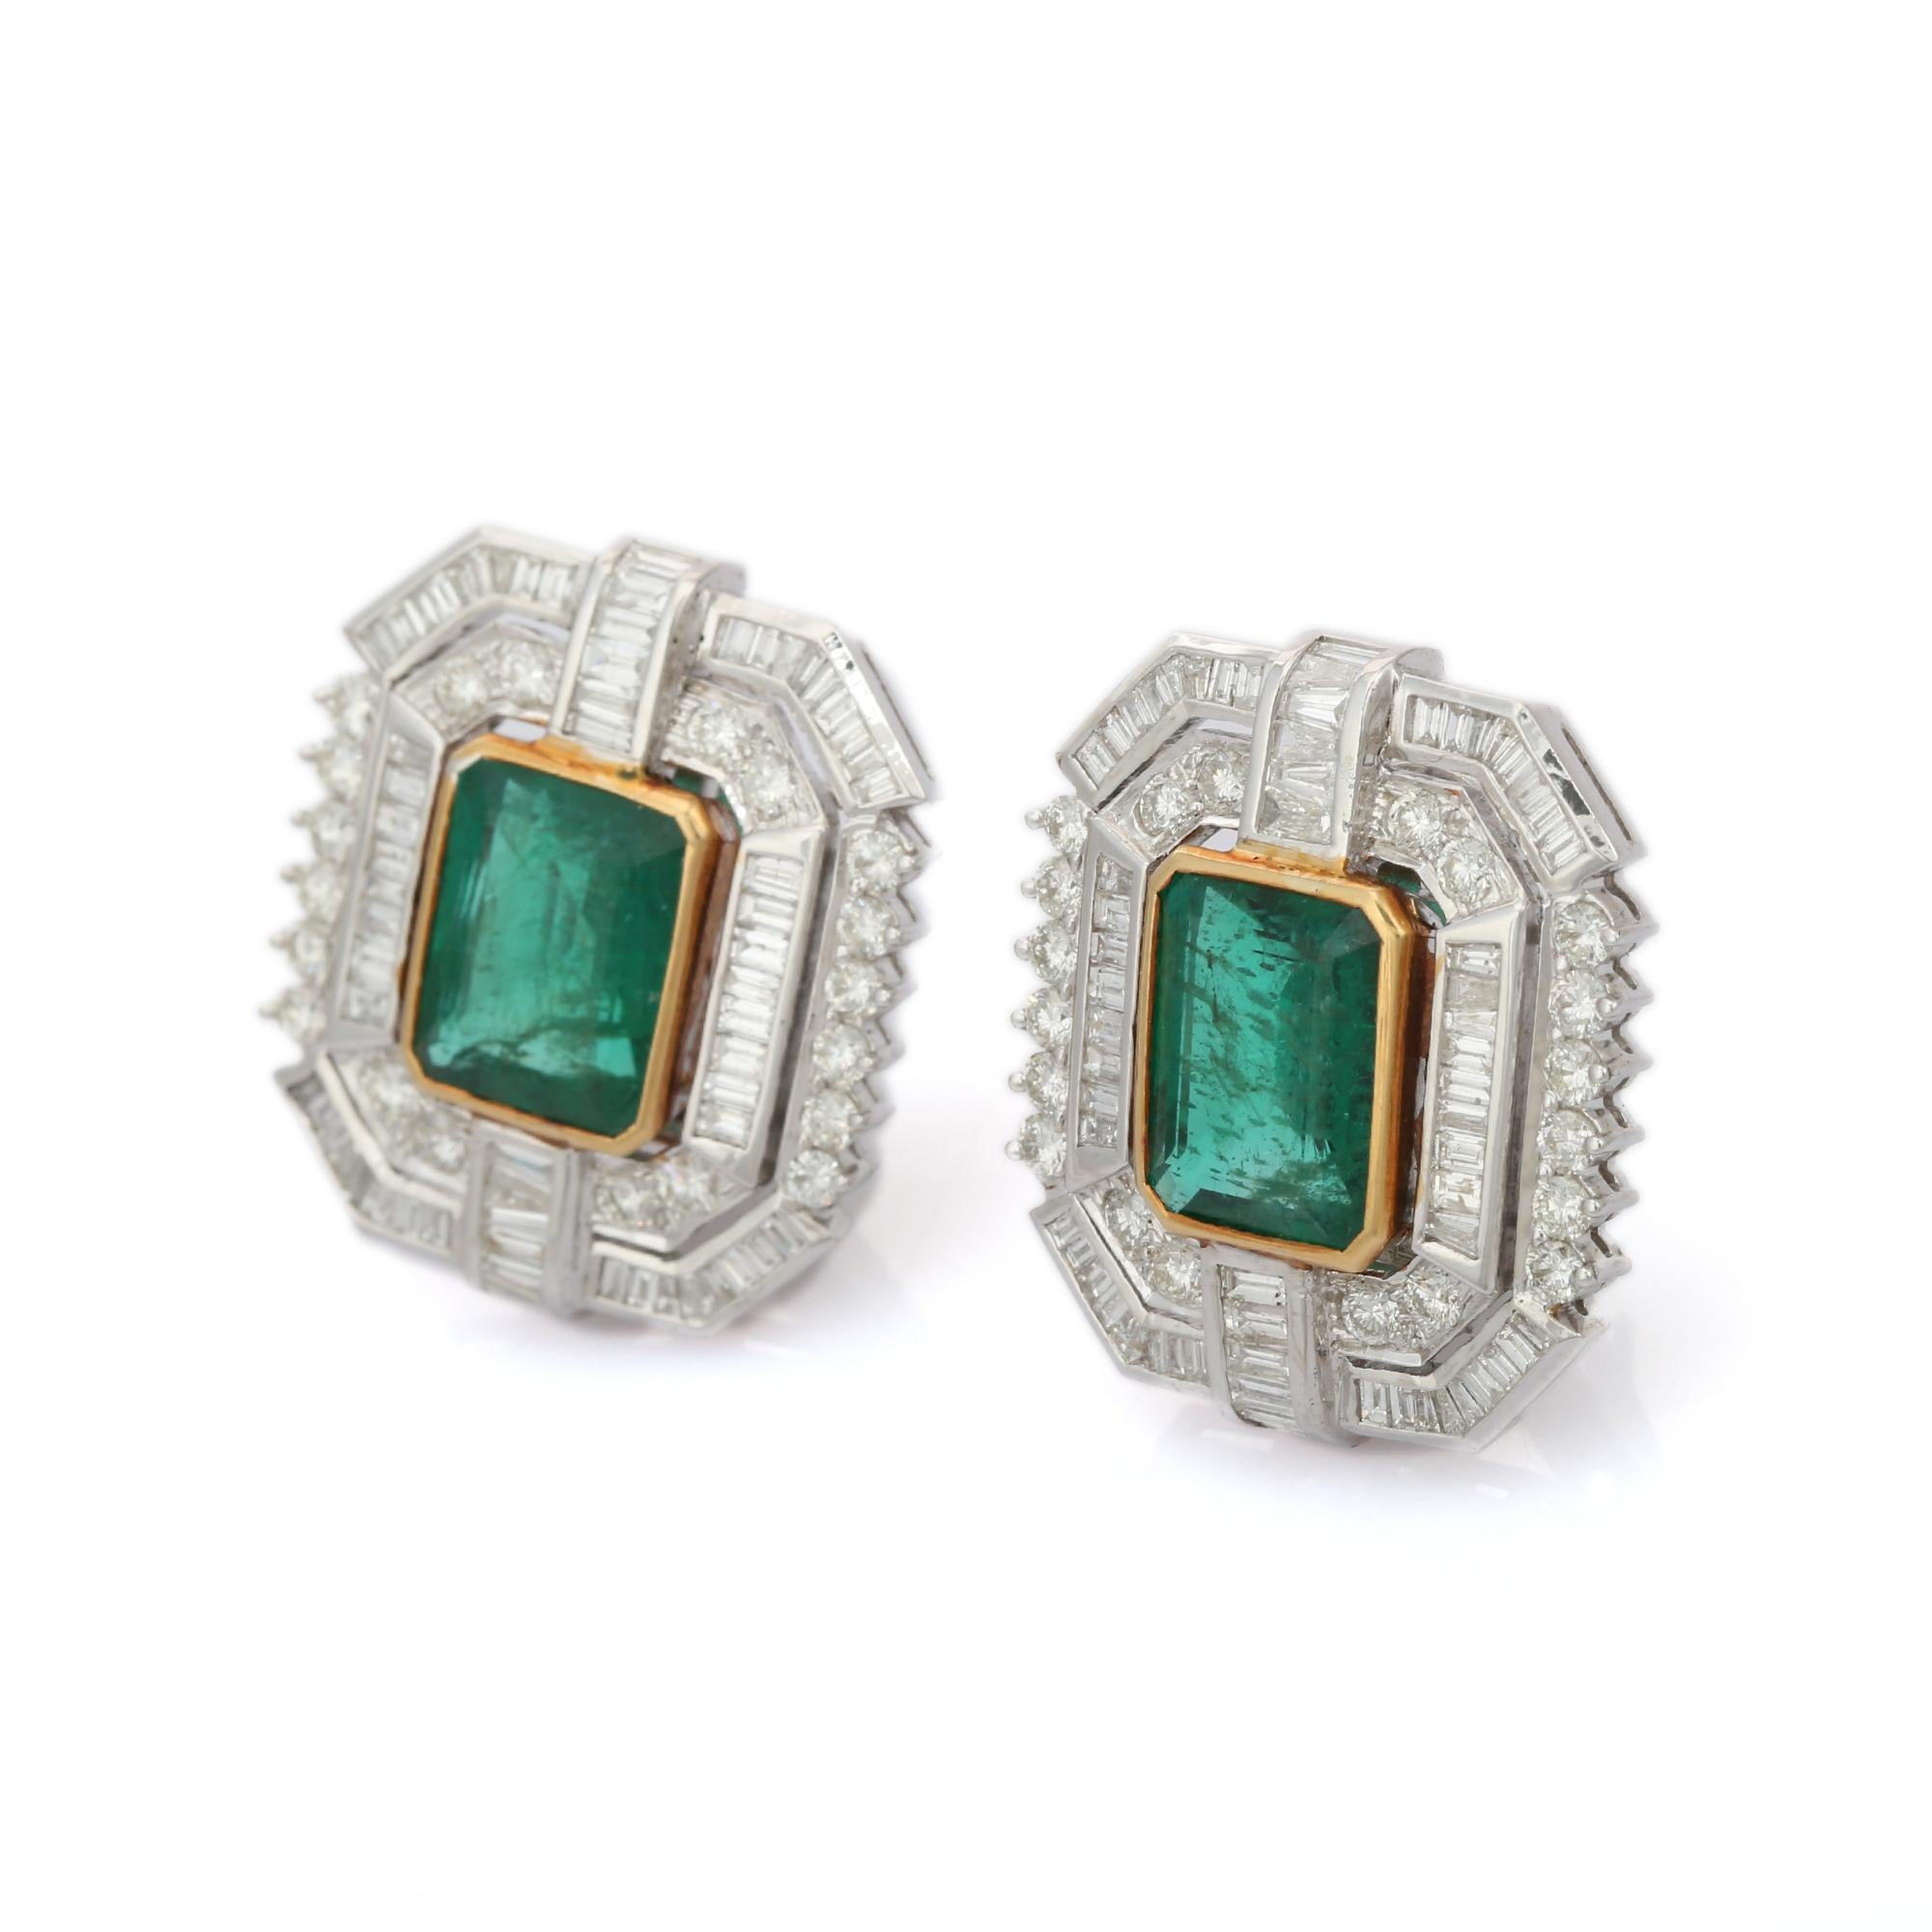 Emerald Diamond Statement Stud Earrings For Wedding in 18K Gold to make a statement with your look. You shall need small stud earrings to make a statement with your look. These earrings create a sparkling, luxurious look featuring octagon cut